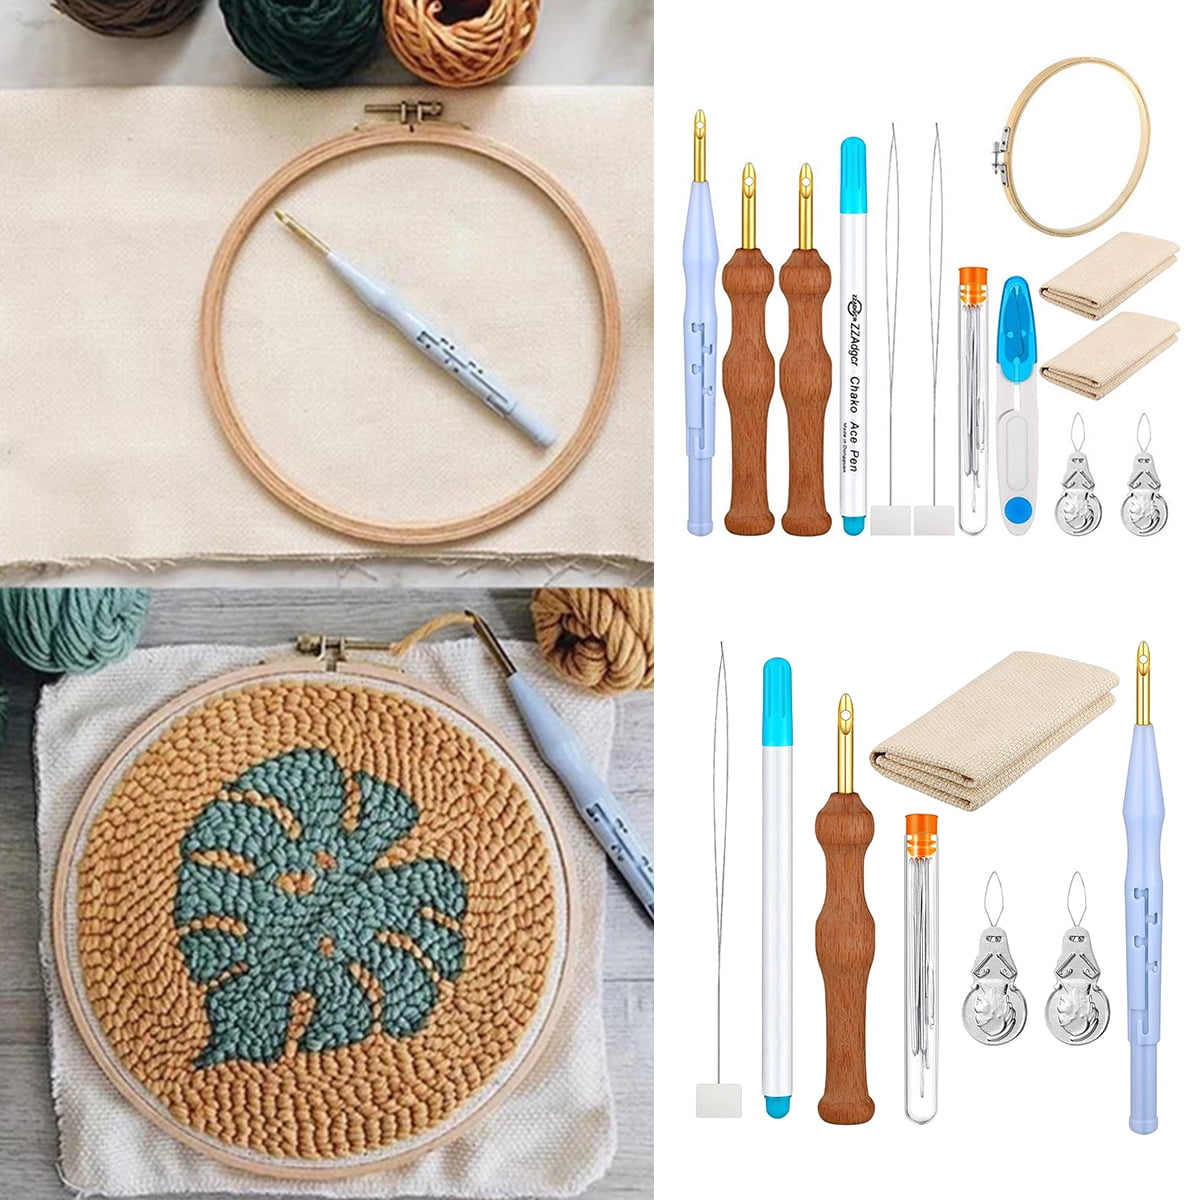 Pllieay 2 Punch Needle Embroidery Starter Kits Include Instructions, Punch Needle Fabric with Yarns, Embroidery Hoops Rug-Punch & Pinch Needle, Other